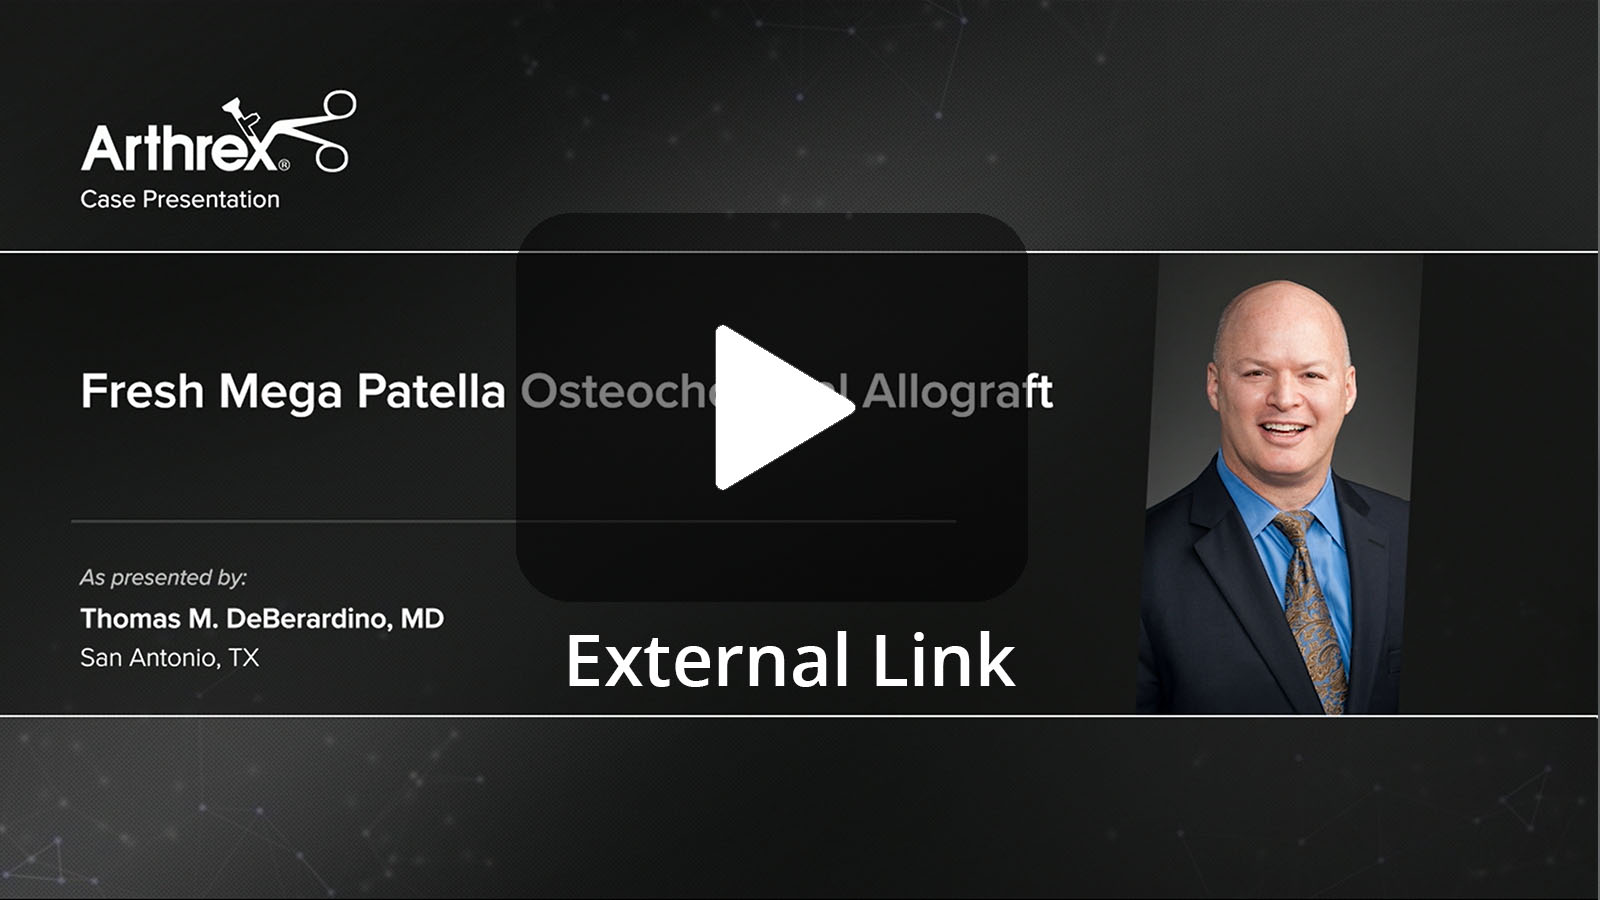 Thomas M. DeBerardino, MD presents a complex case that included an anterior cruciate ligament (ACL) revision, high-tibial osteotomy, medial meniscus allograft transplant, and osteochondral allograft of the patella. (External Link)